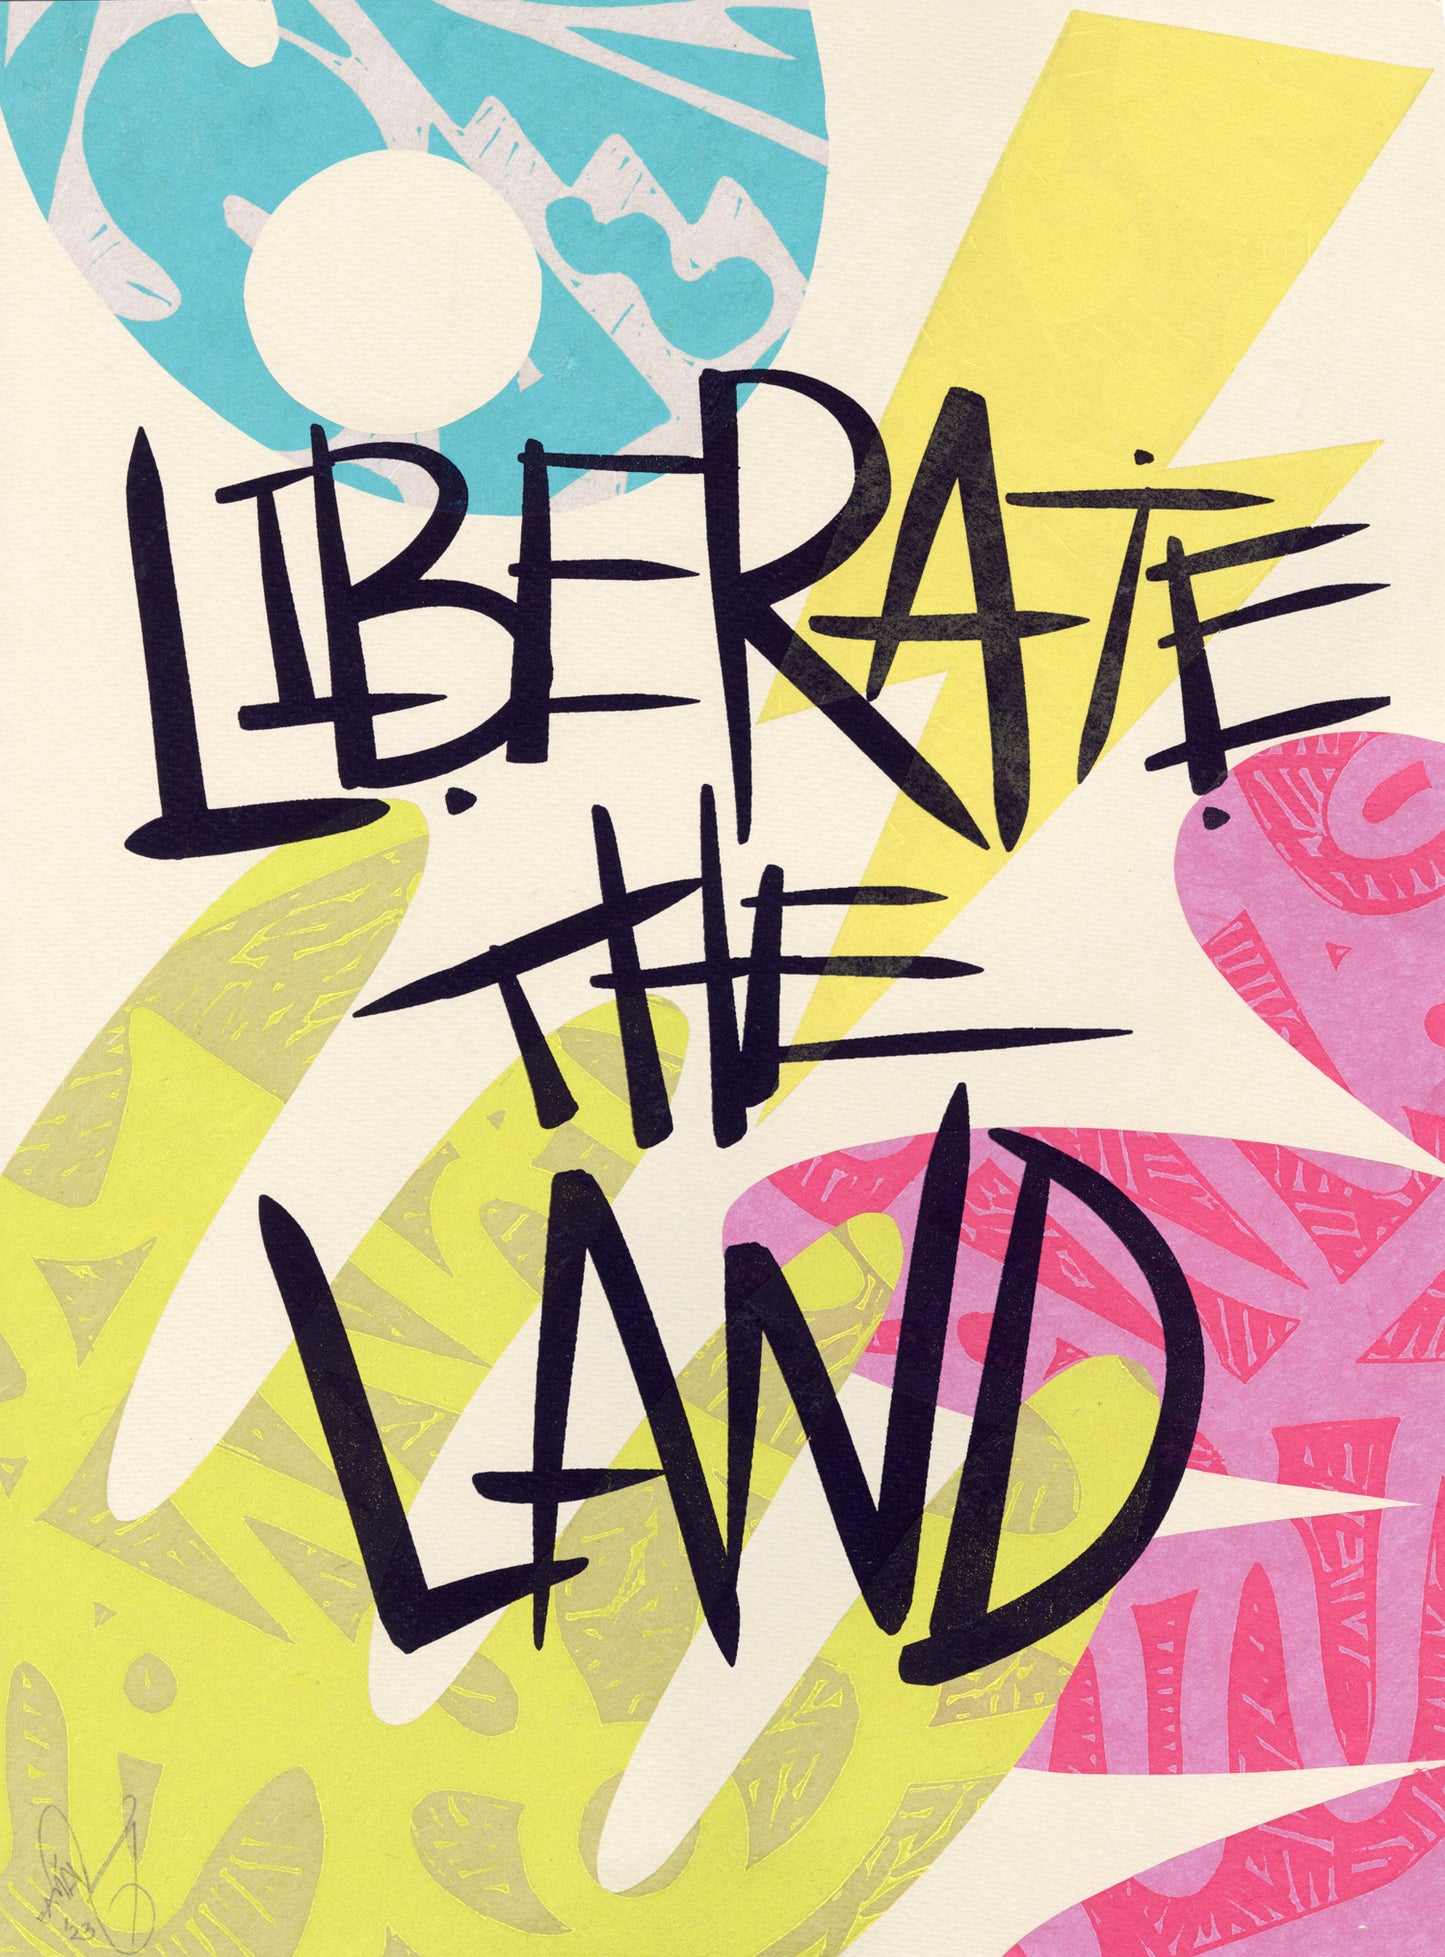 Liberate The Land 34